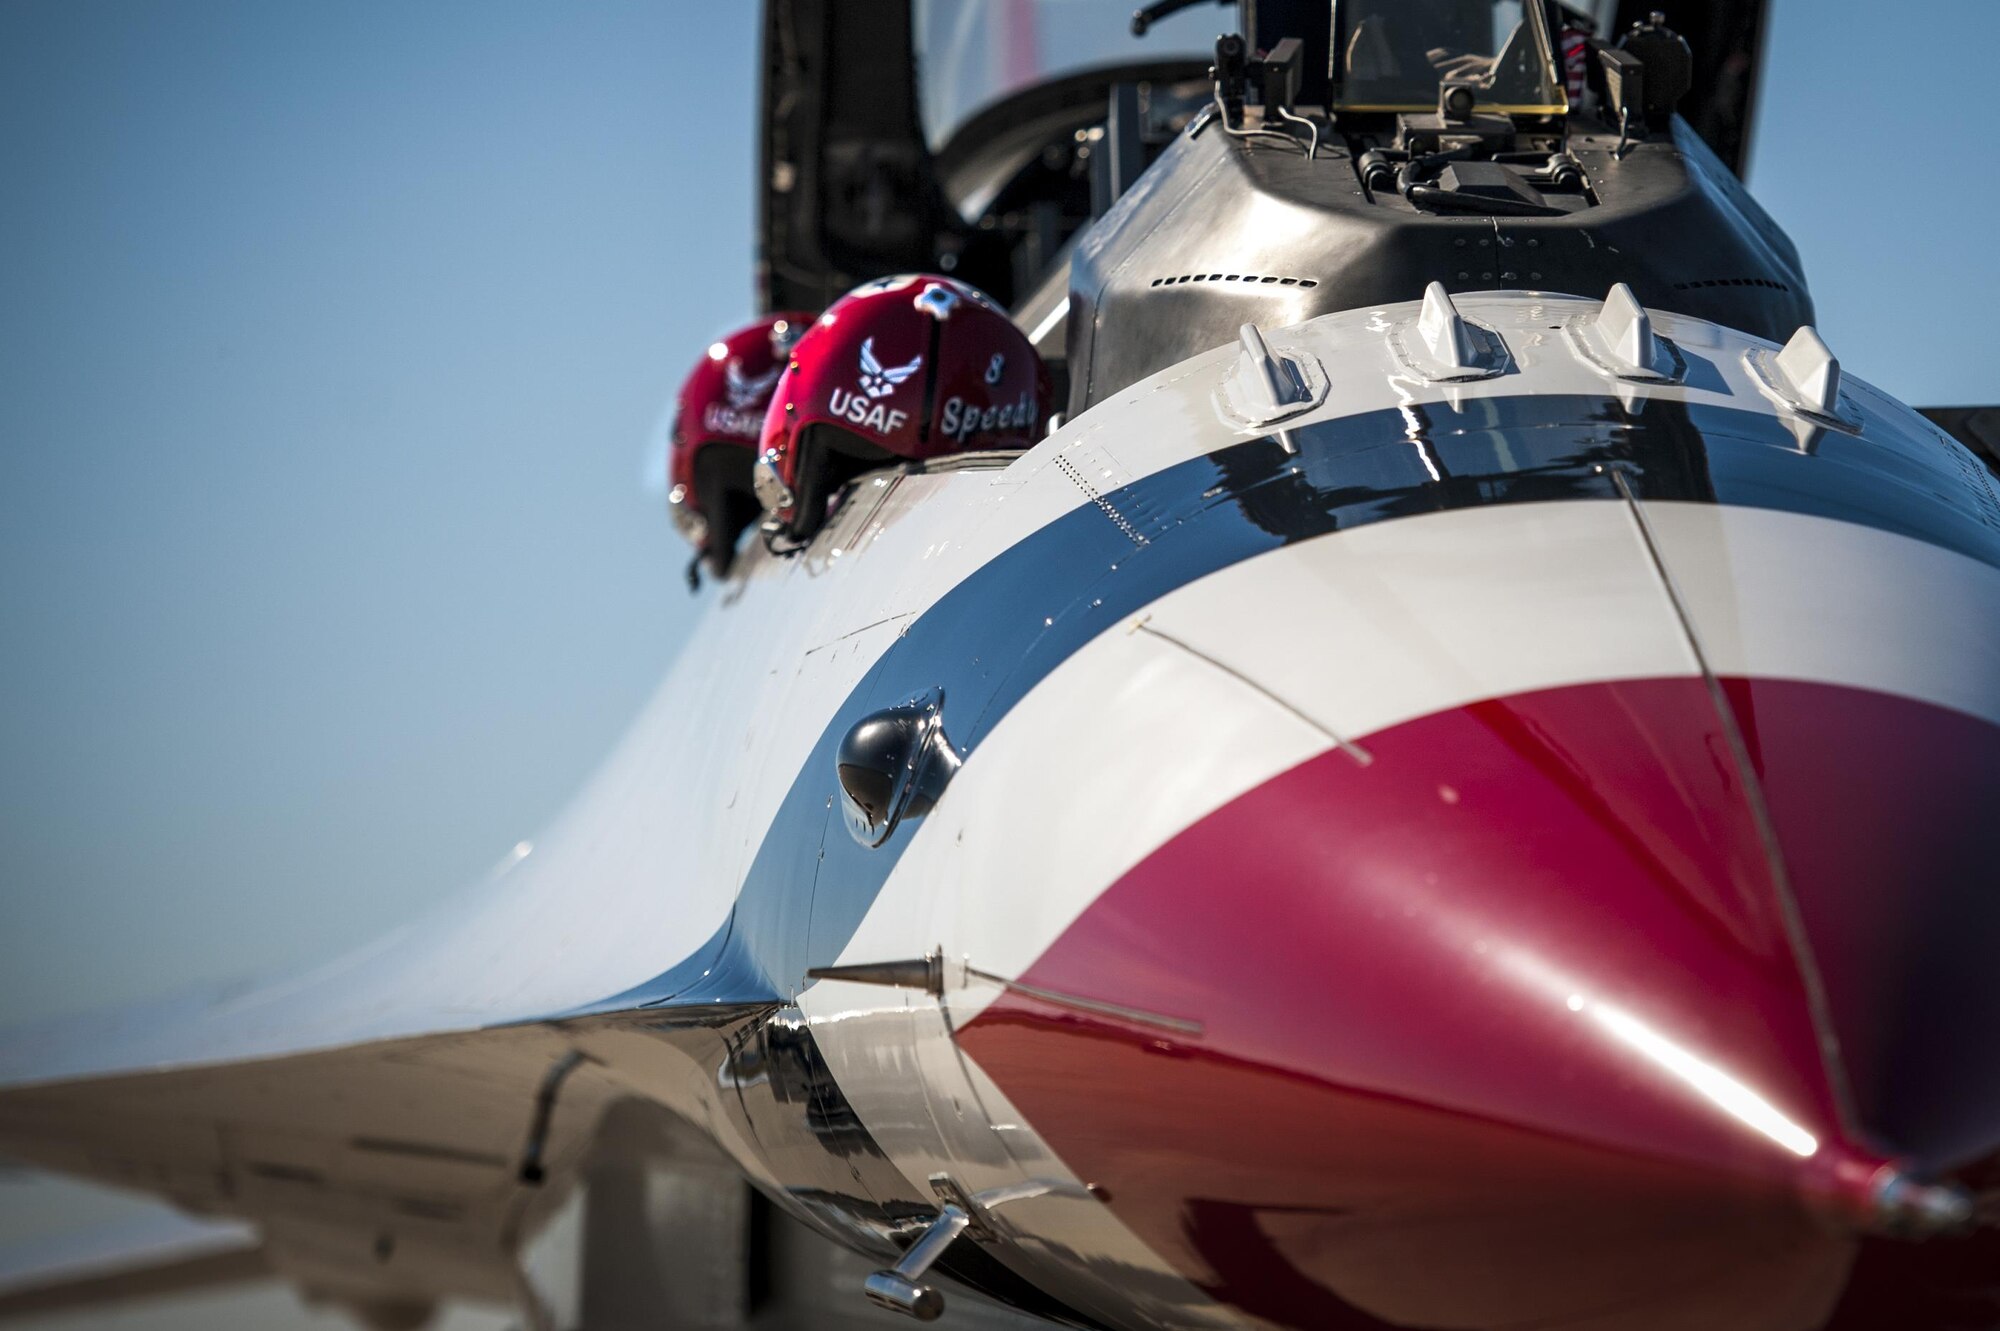 Helmets rest on the side of an F-16D Fighting Falcon Feb. 17, 2017, at Moody Air Force Base, Ga. The U.S. Air Force Thunderbirds are known as the “Ambassadors in Blue,” and will be representing the Air Force during the Thunder Over South Georgia Air Show in October 2017, at Moody AFB. (U.S. Air Force photo/Airman 1st Class Lauren M. Sprunk)